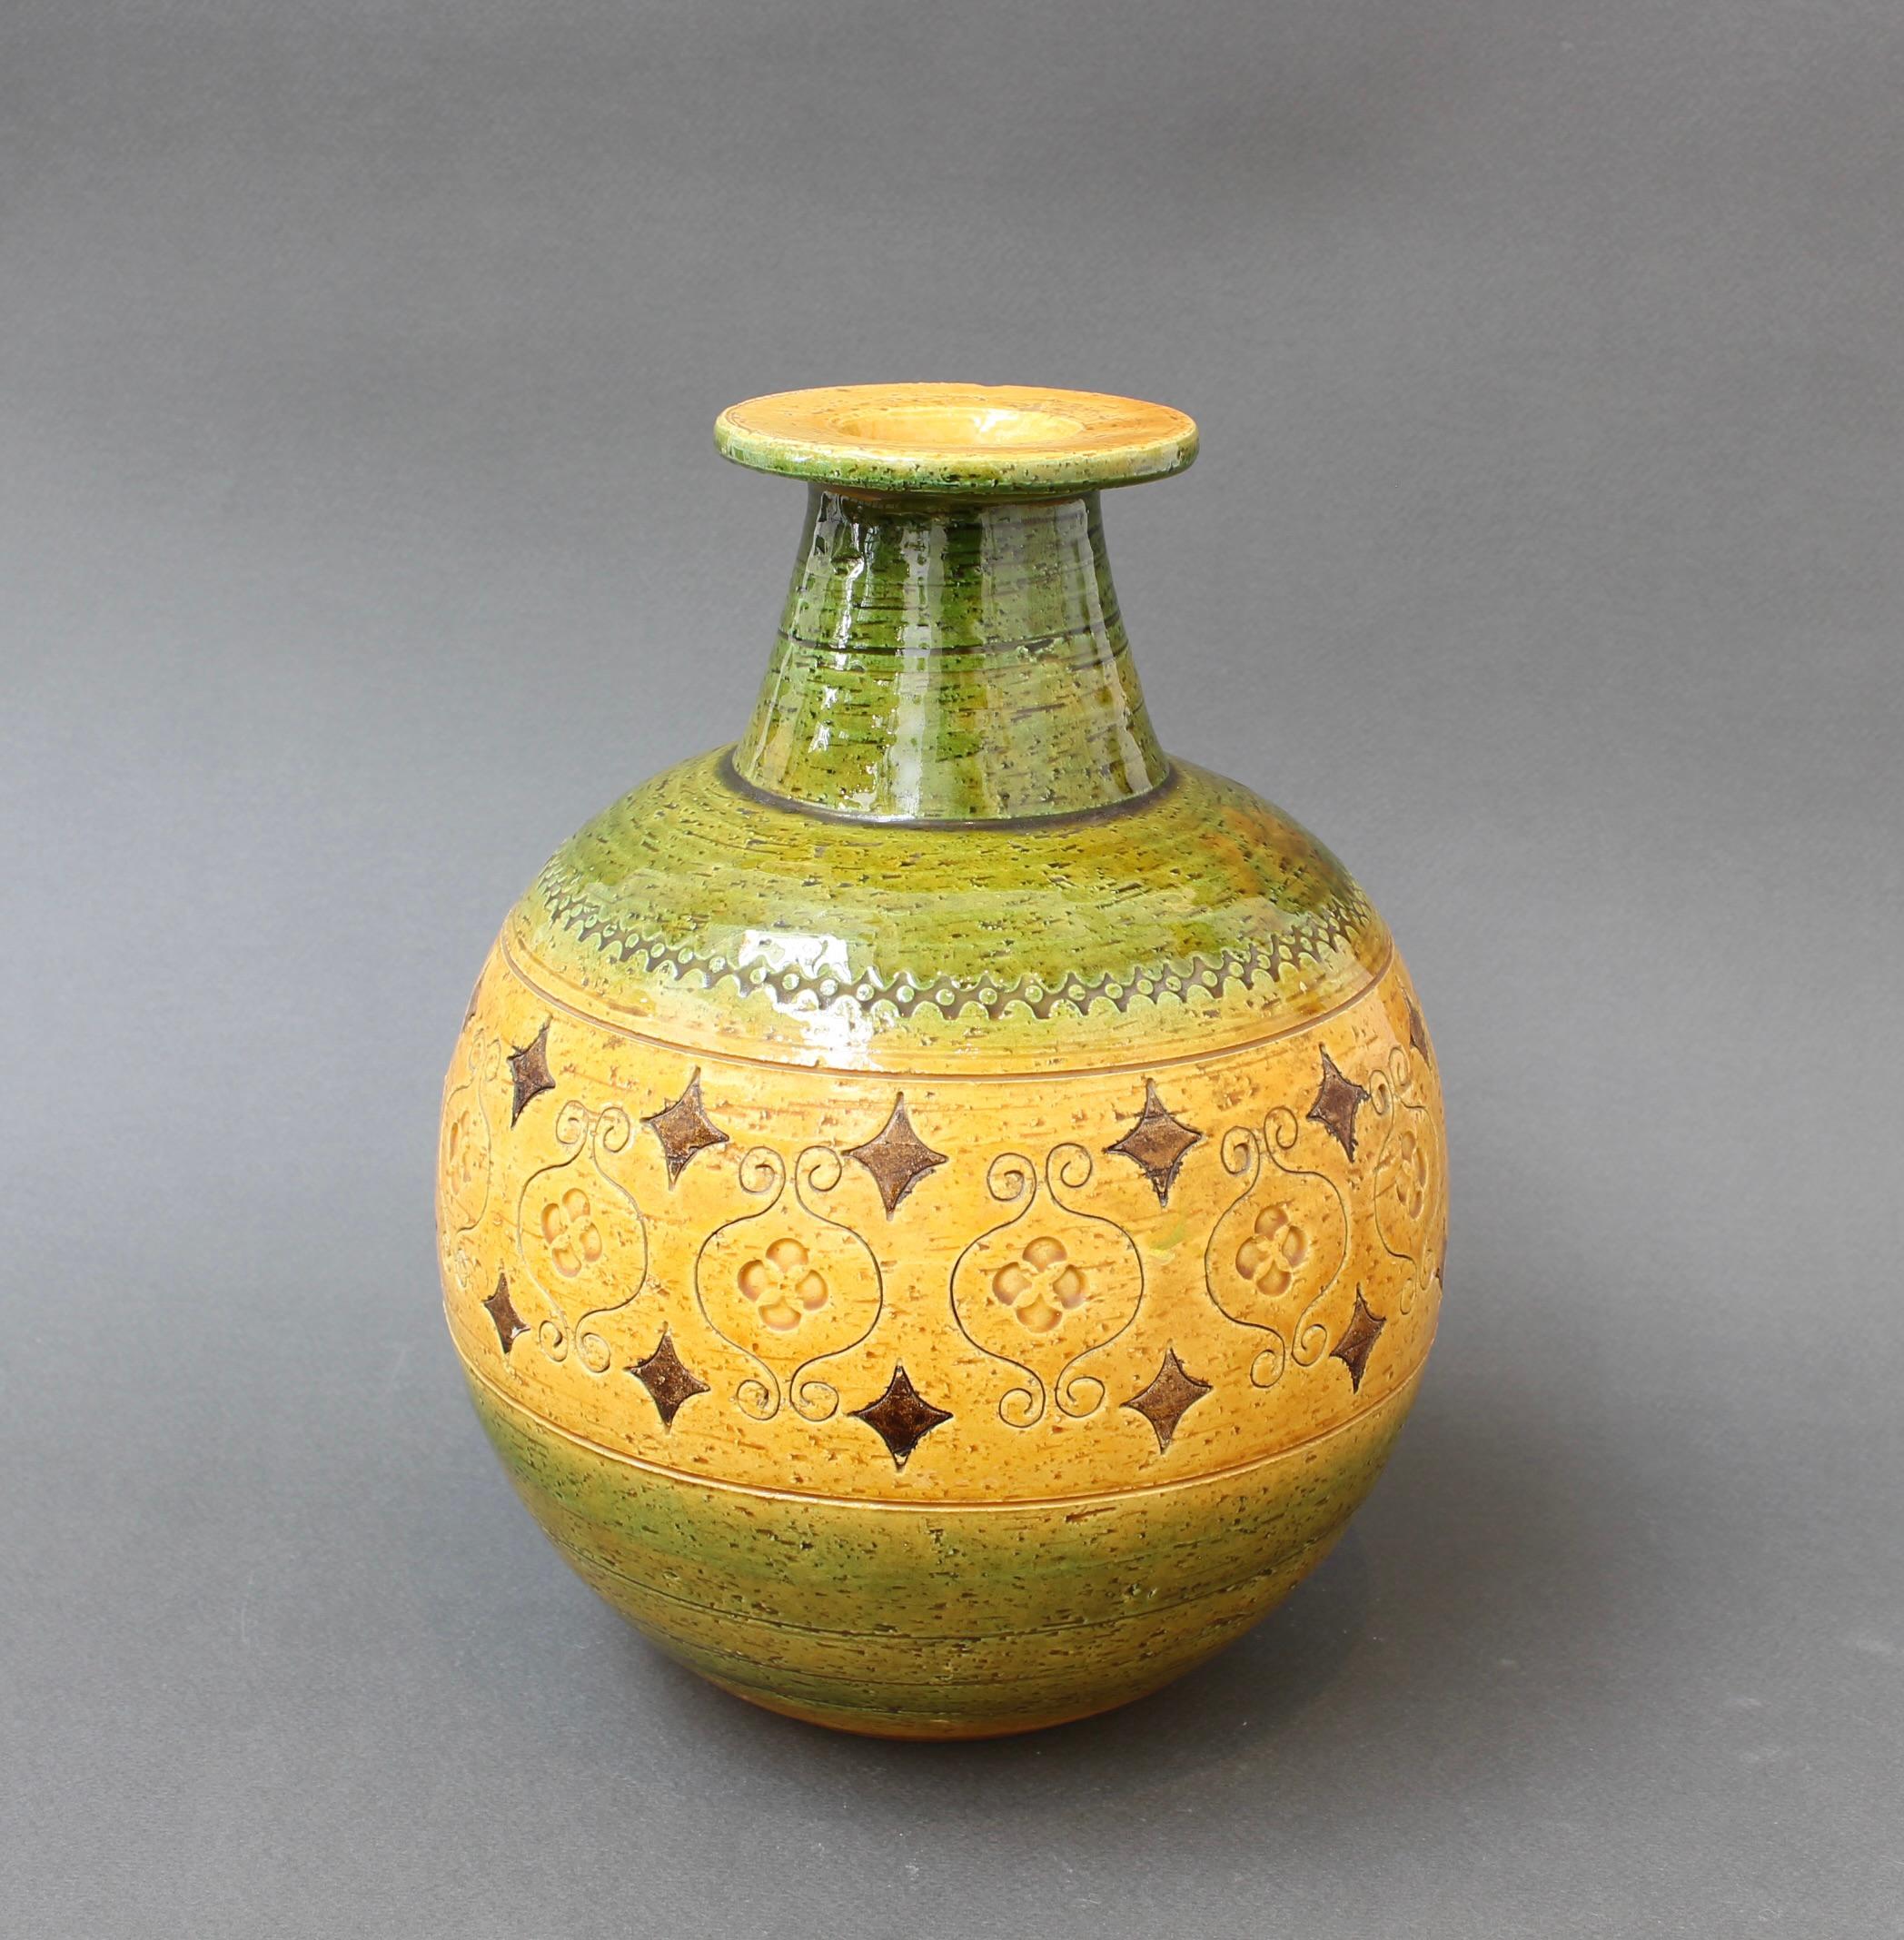 Mid-Century Italian ceramic vase by Aldo Londi for Bitossi (circa 1960s). Part of the 'Arabesque' range designed by Aldo Londi which was produced in the 1960s, it presents a glazed central yellow band with green at the neck and base. These pieces